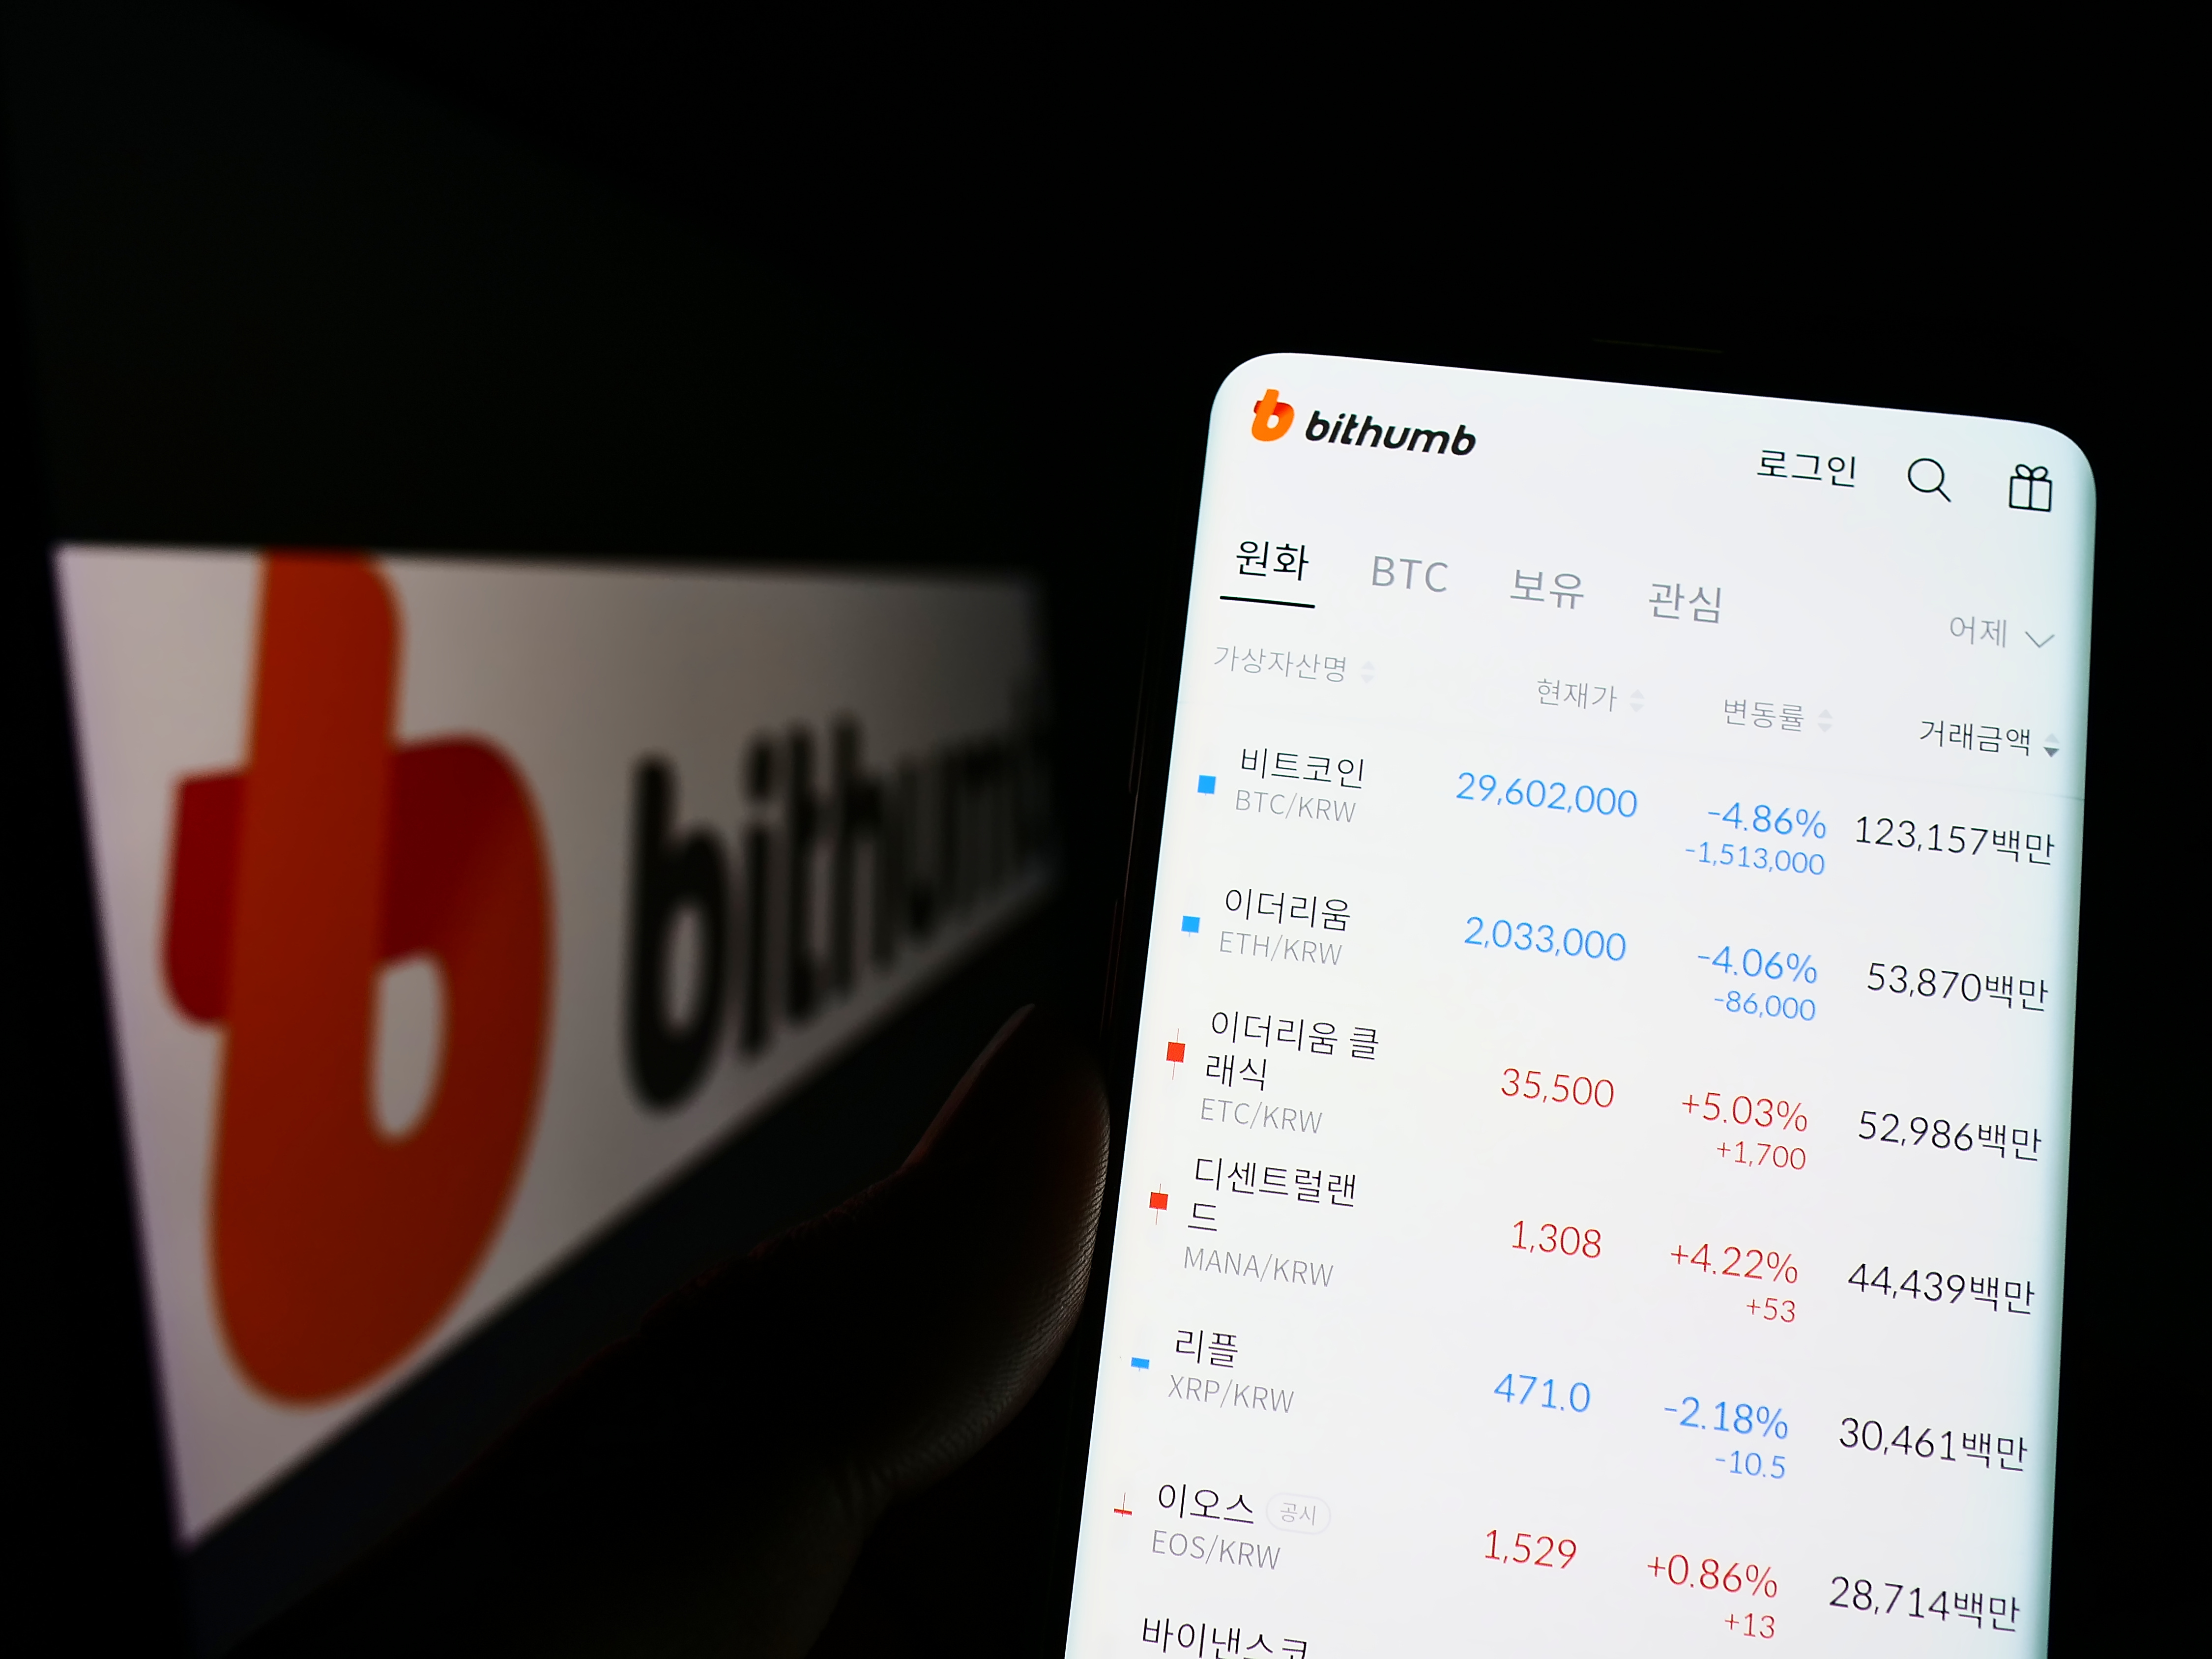 A cellphone displays the app of the South Korean crypto exchange Bithumb on its screen, with the exchange&amp;amp;amp;rsquo;s logo visible in the background.